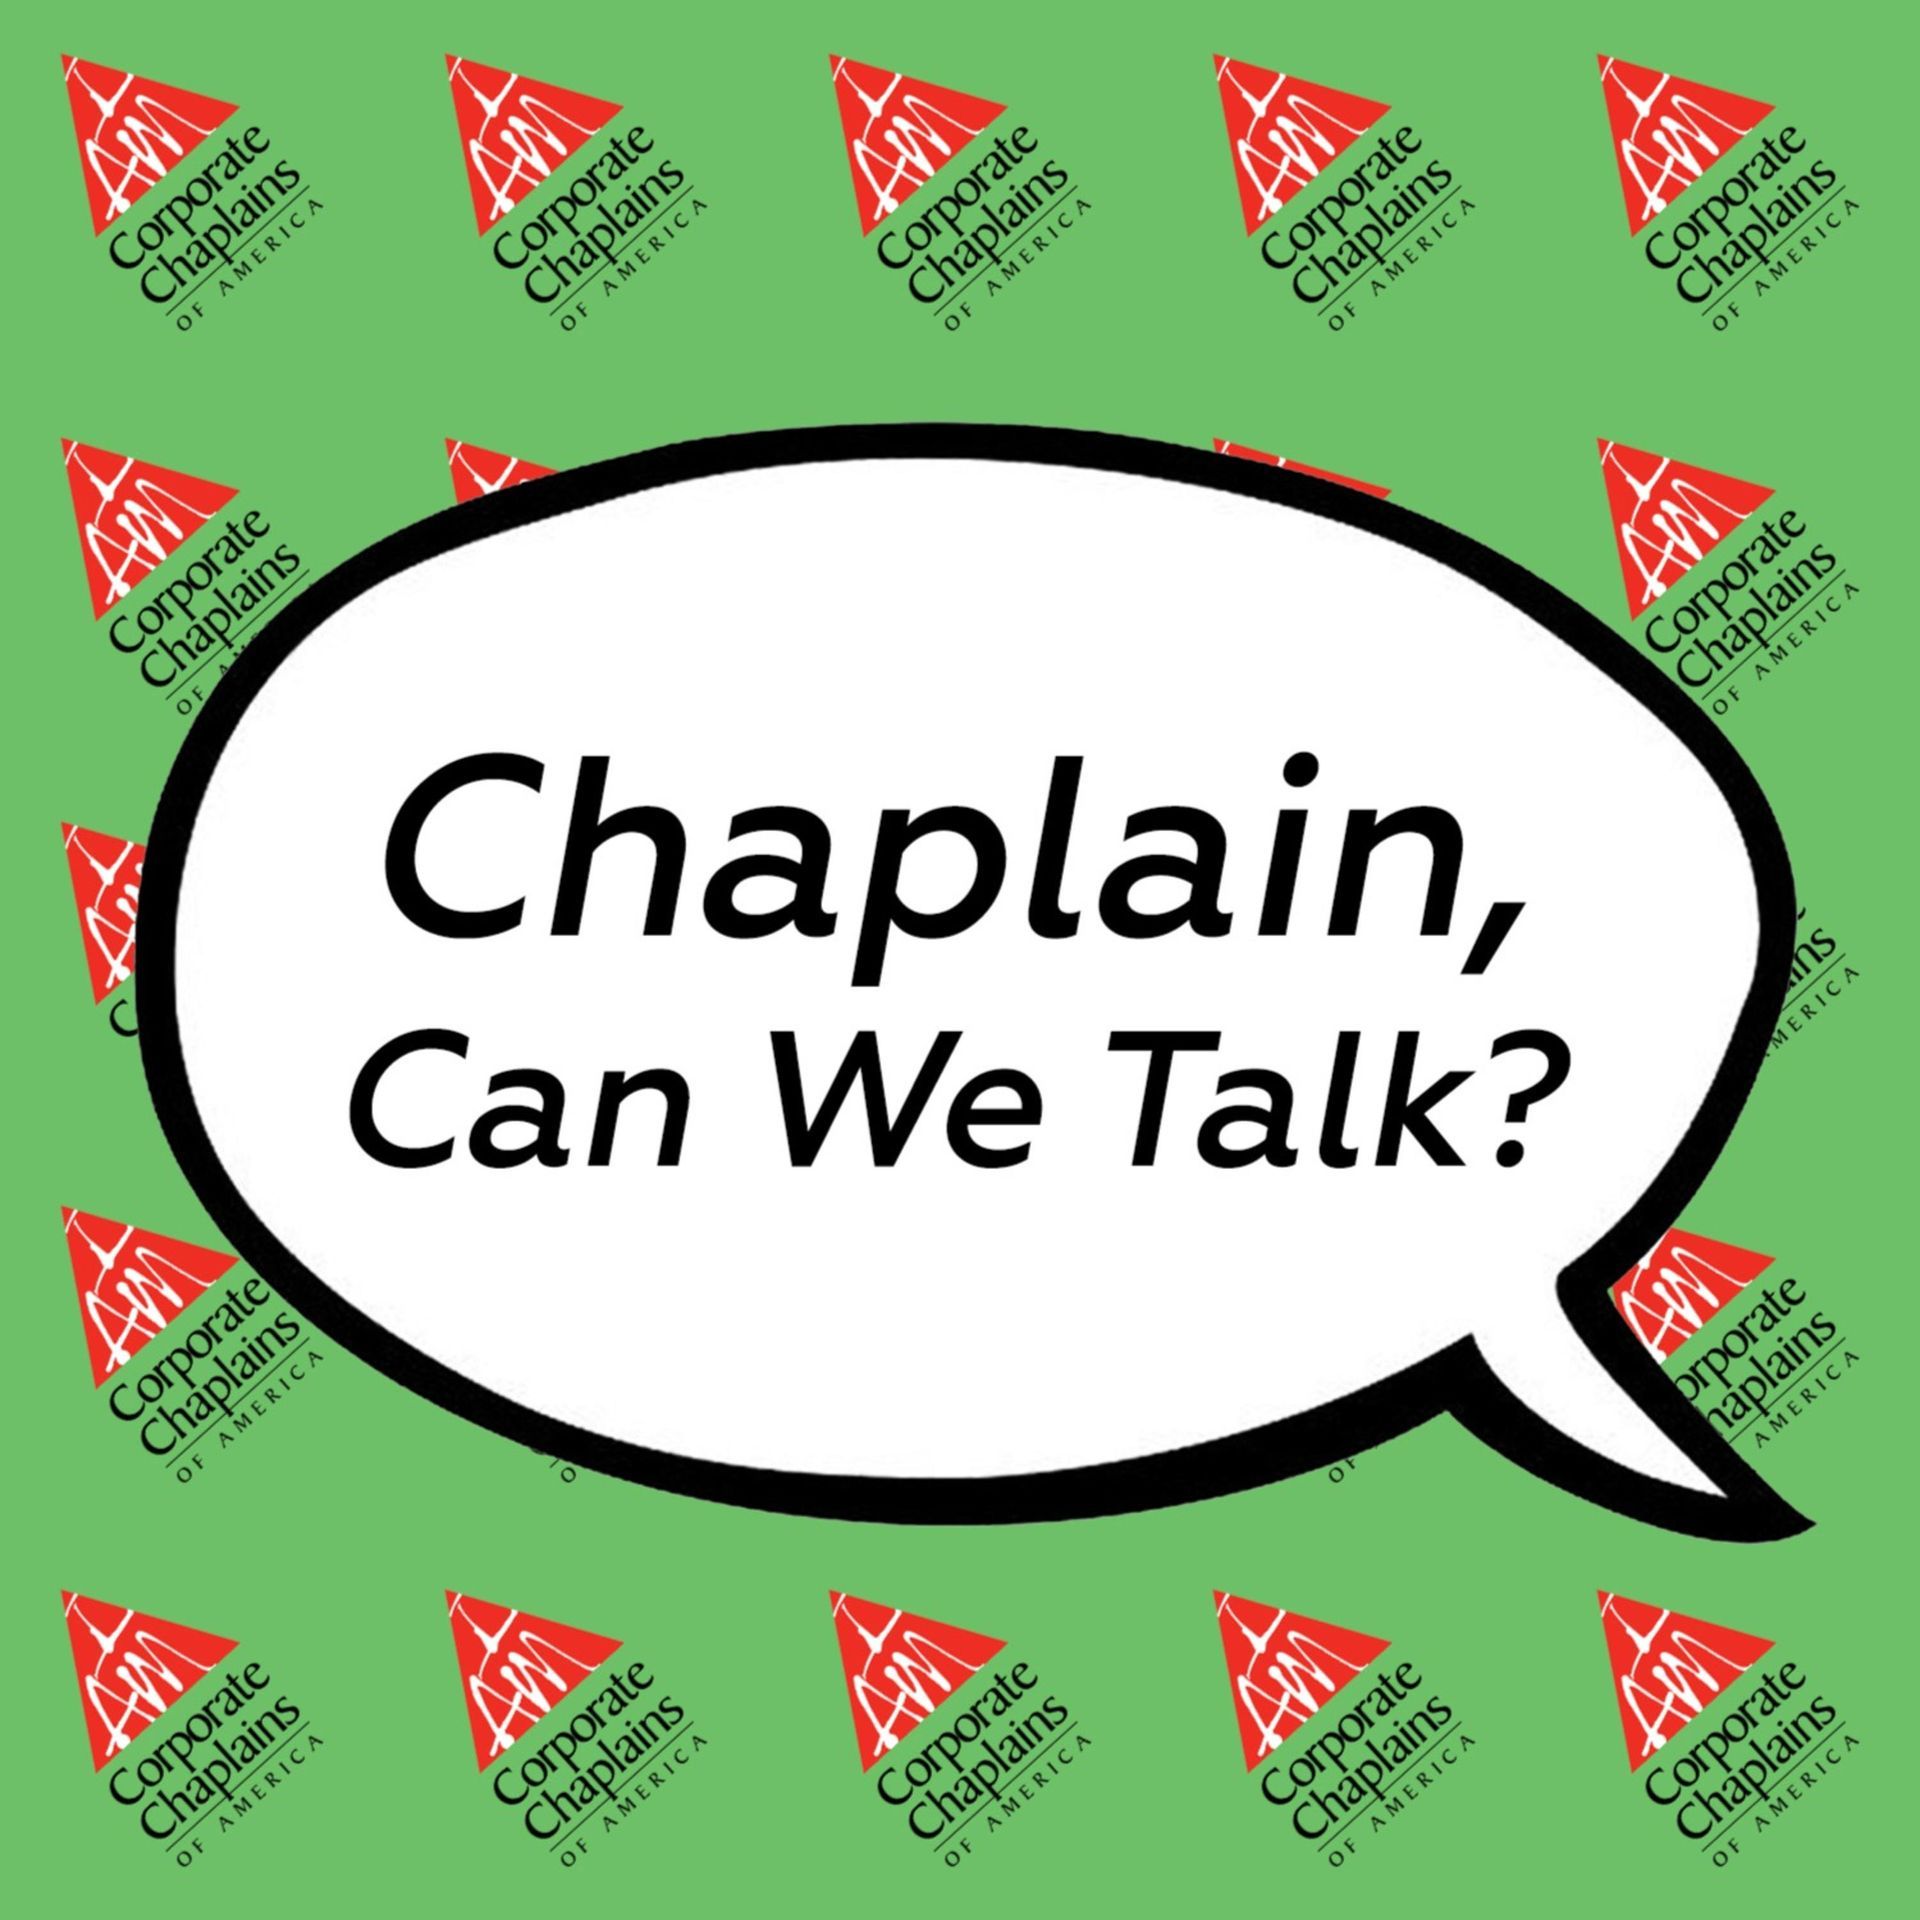 Chaplain can we talk podcast